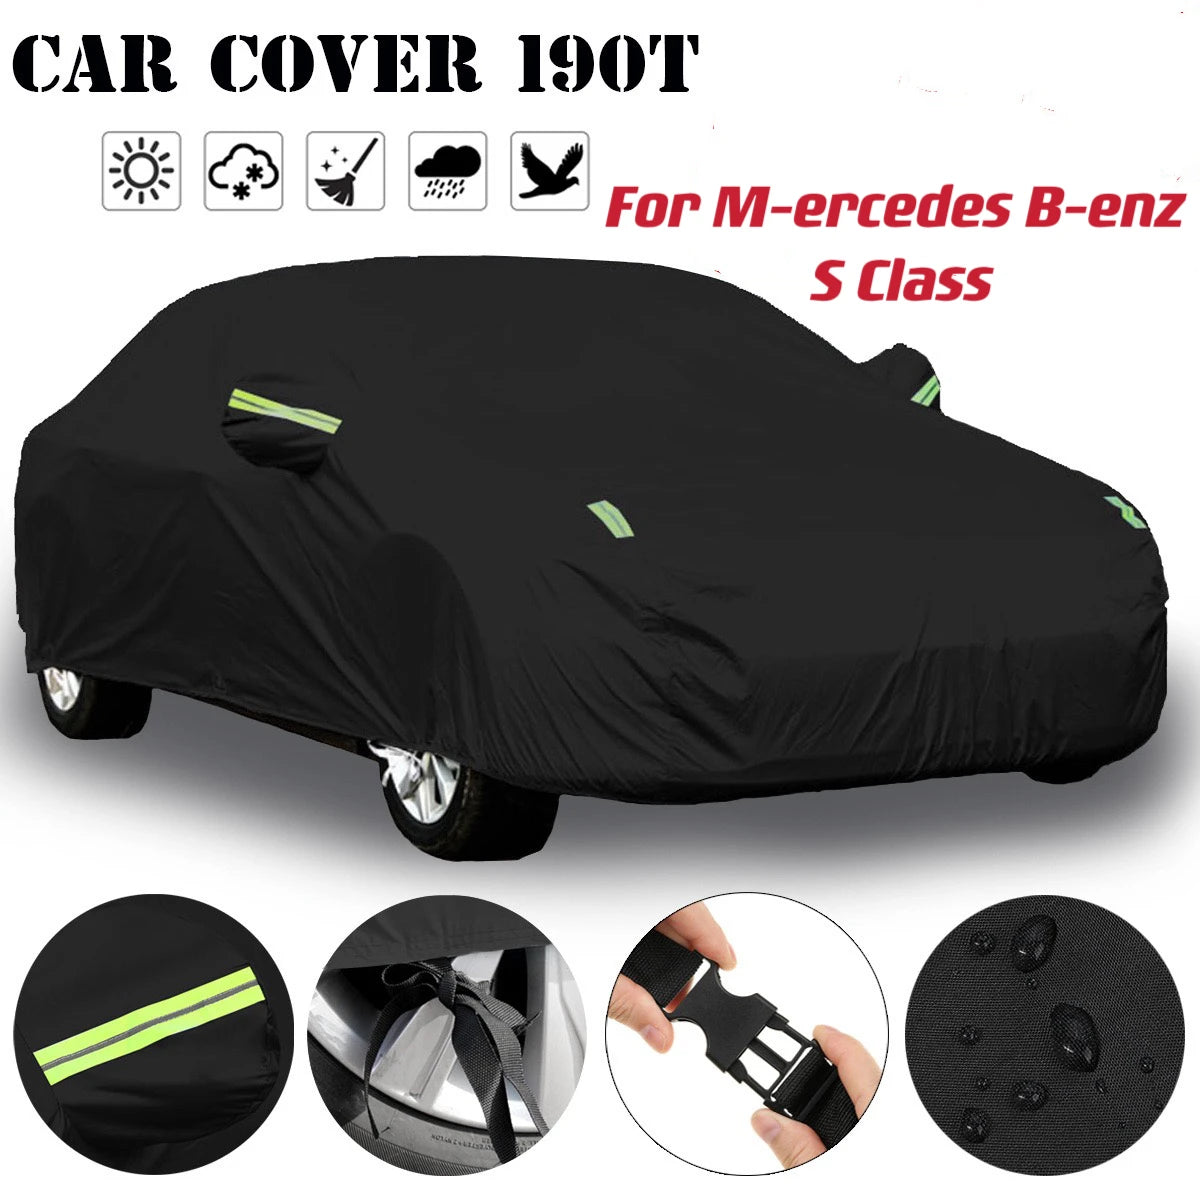 For M-ercedes B-enz S Class Full Car Cover Outdoor Sun Protection Dust Rain Snow Protective Anti-hail Car Cover Auto Black Cover